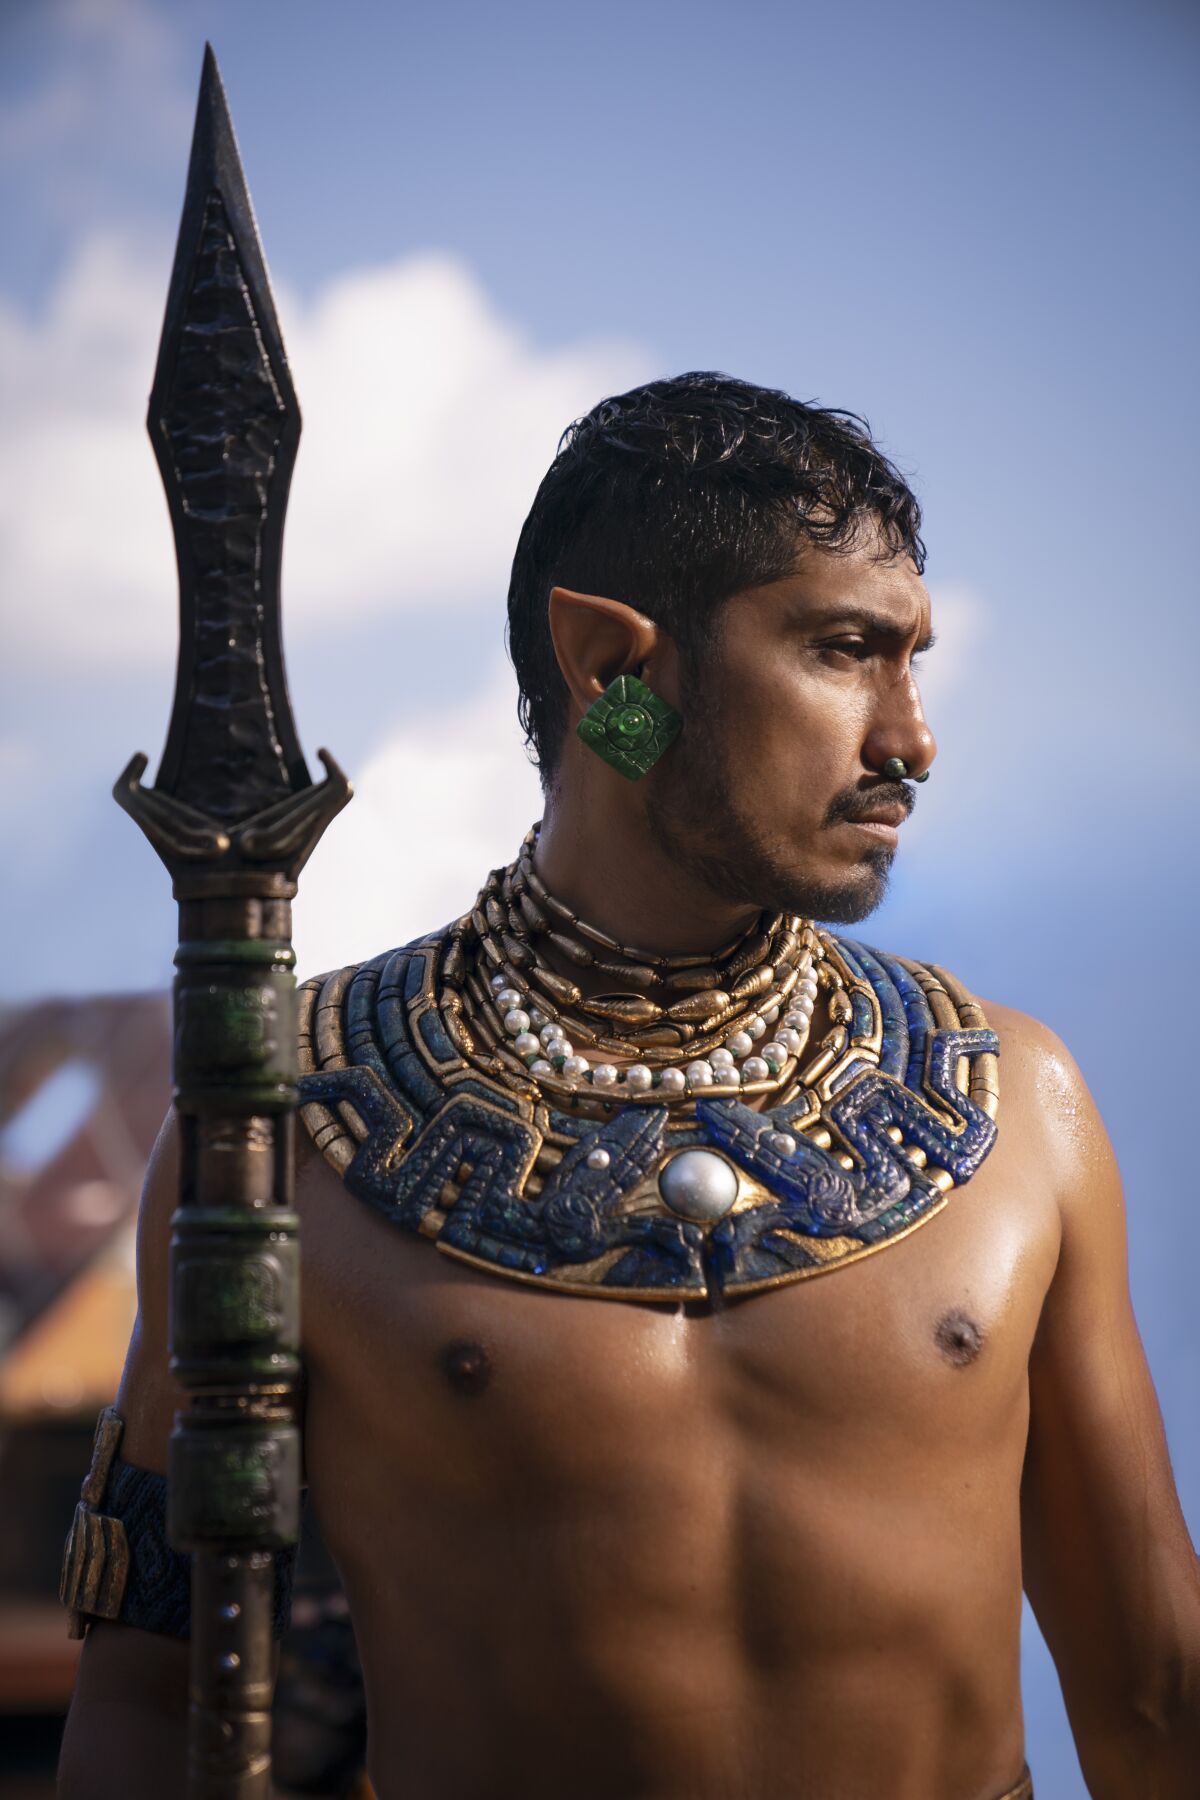 a shirtless man holding a spear